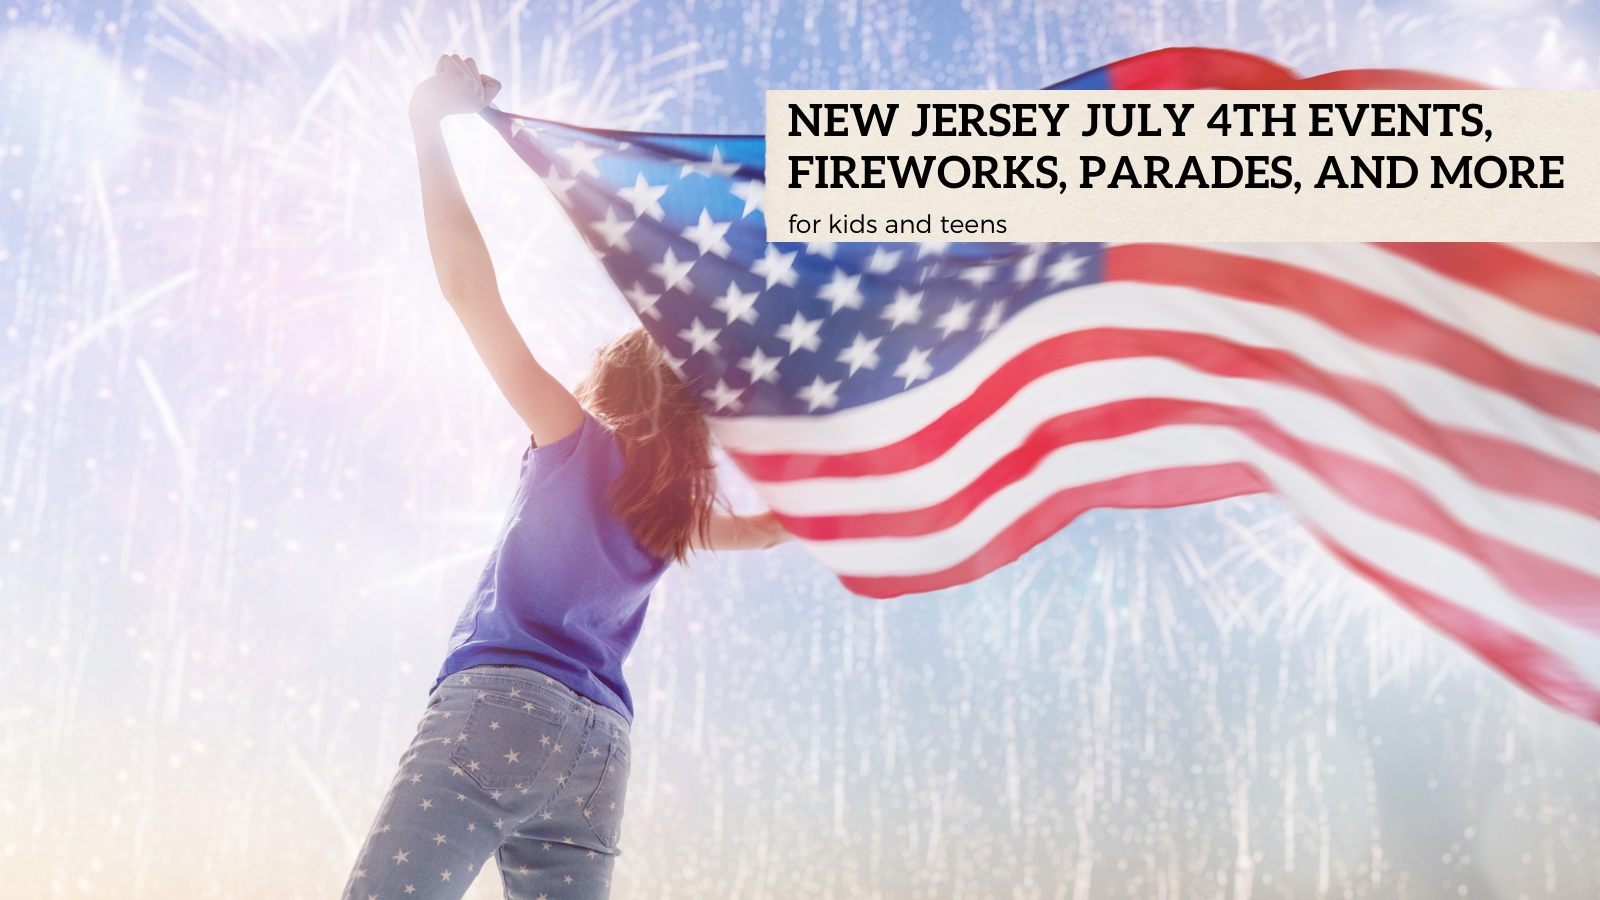 New-Jersey-July-4th-Events-Fireworks-Parades-AND-More-twitter-image